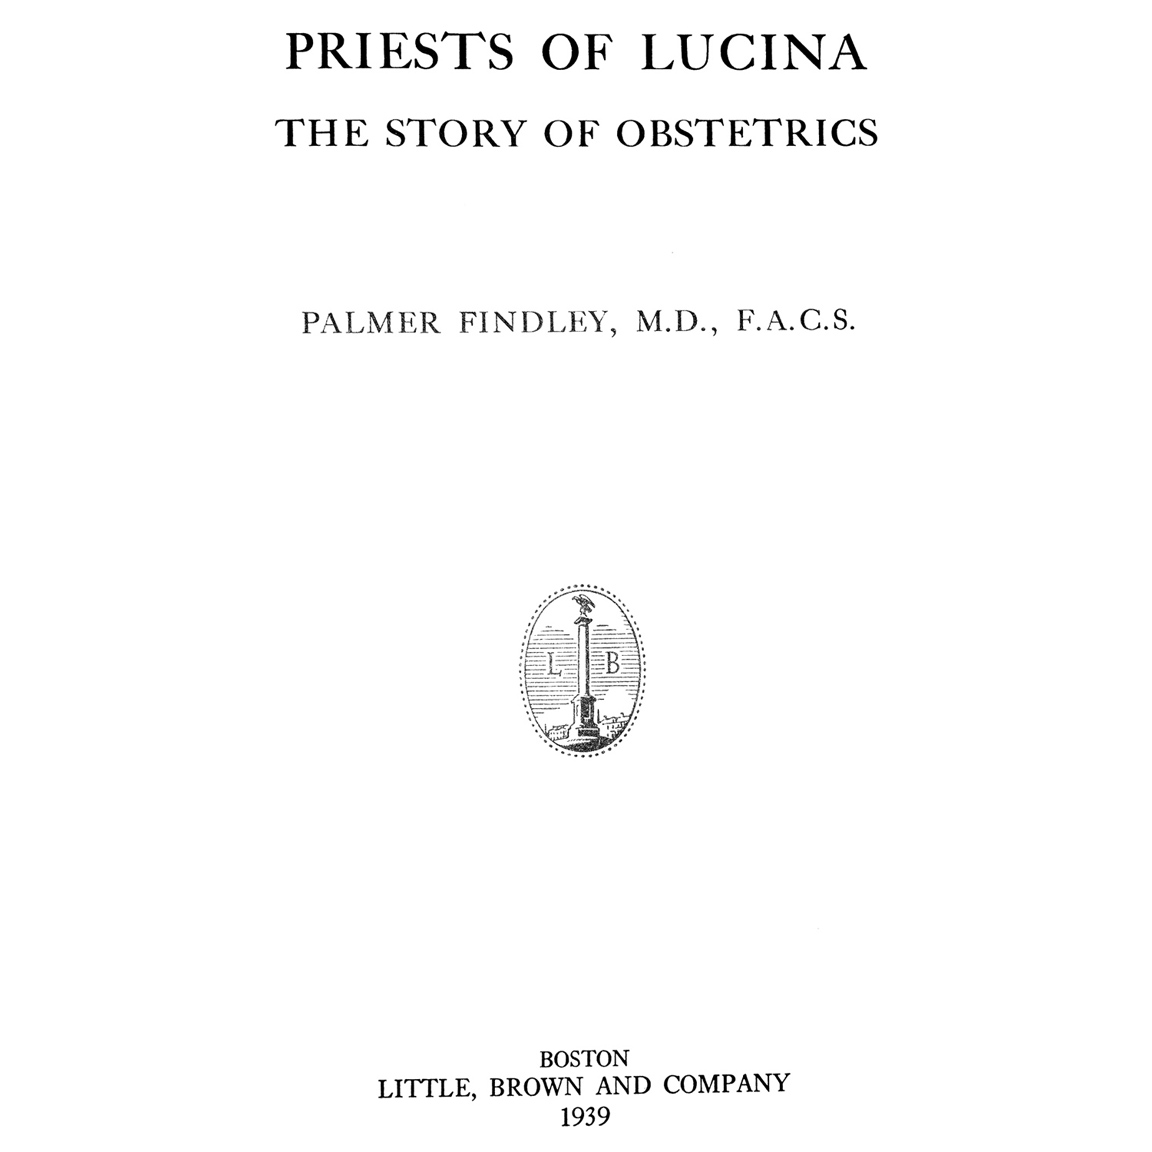 1939-FINDLEY-Priests of Lucina-title page